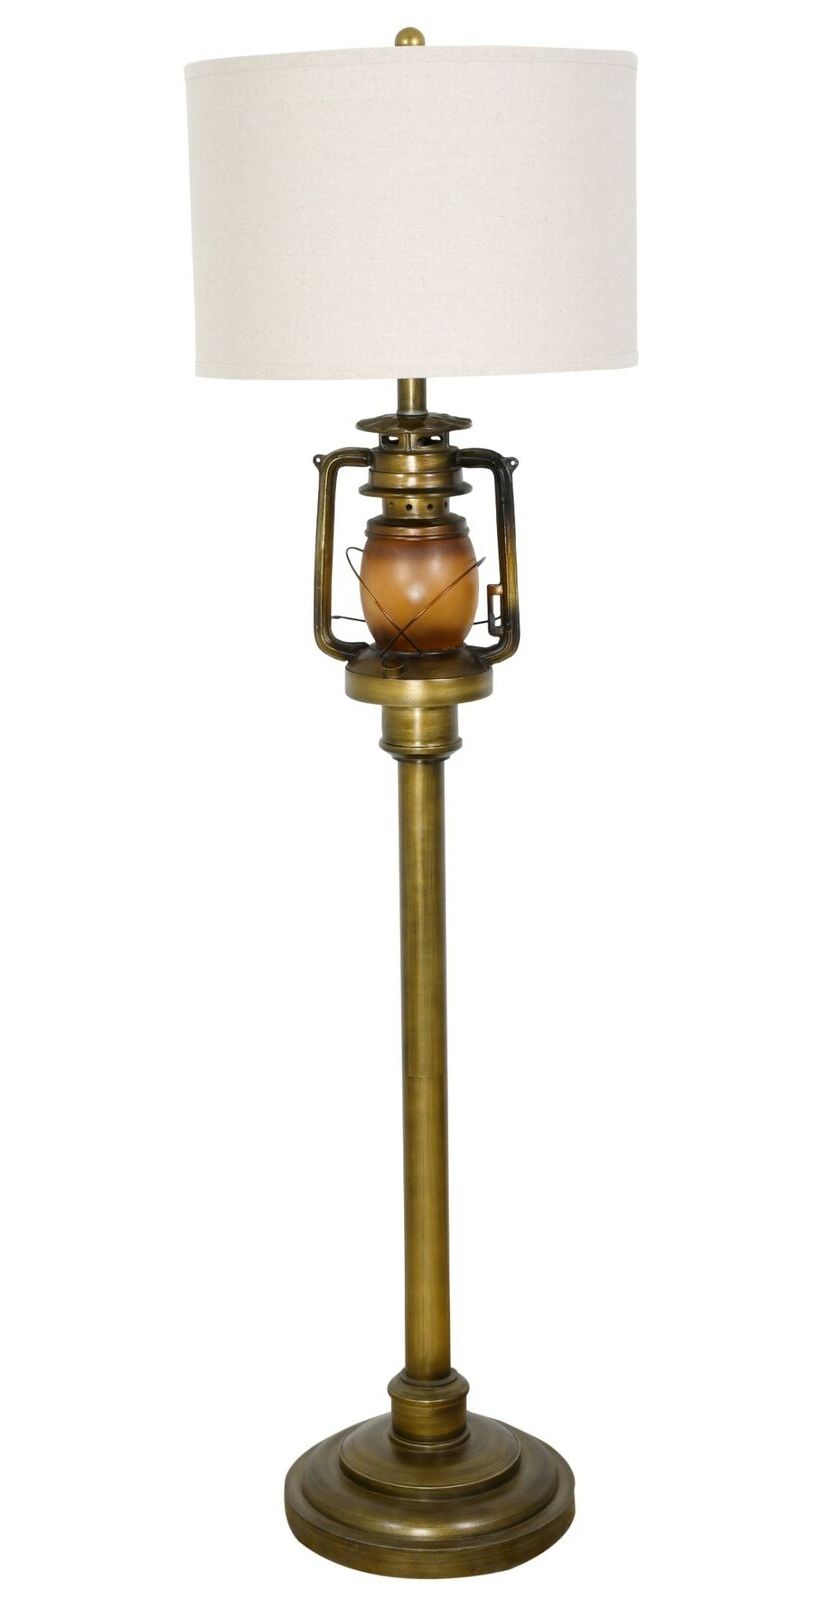 Most Current Lantern Standing Lamps Inside Railroad Train Lantern Decorative Floor Lamp With Shade (View 14 of 15)